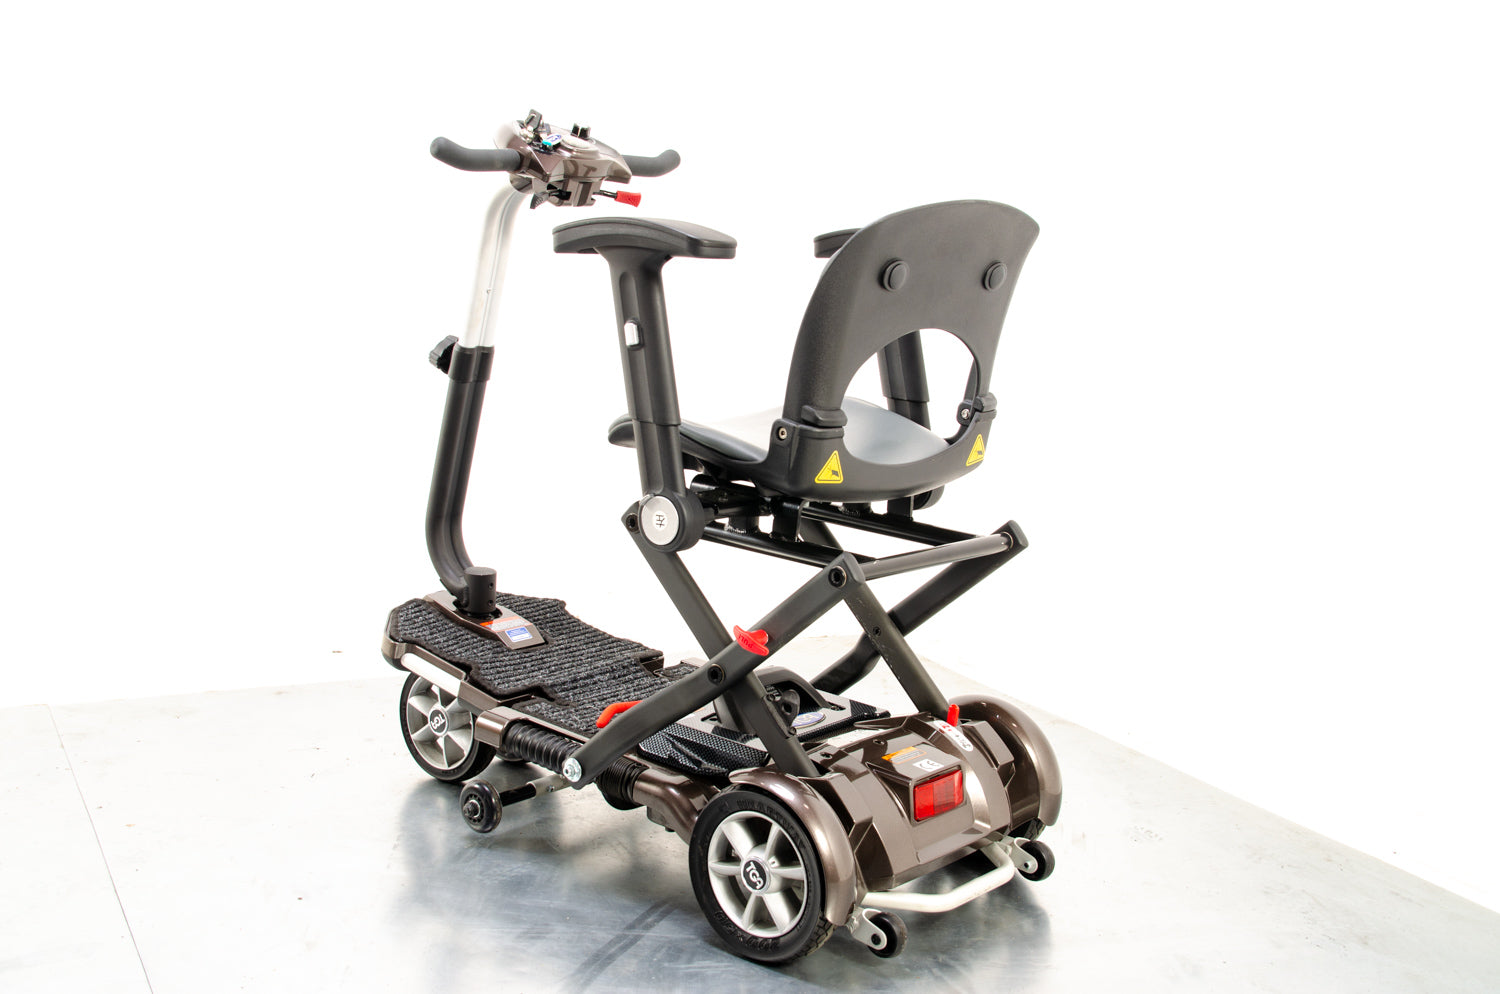 TGA Minimo Used Mobility Scooter Small Compact Folding Travel Lithium Battery Lightweight 13461